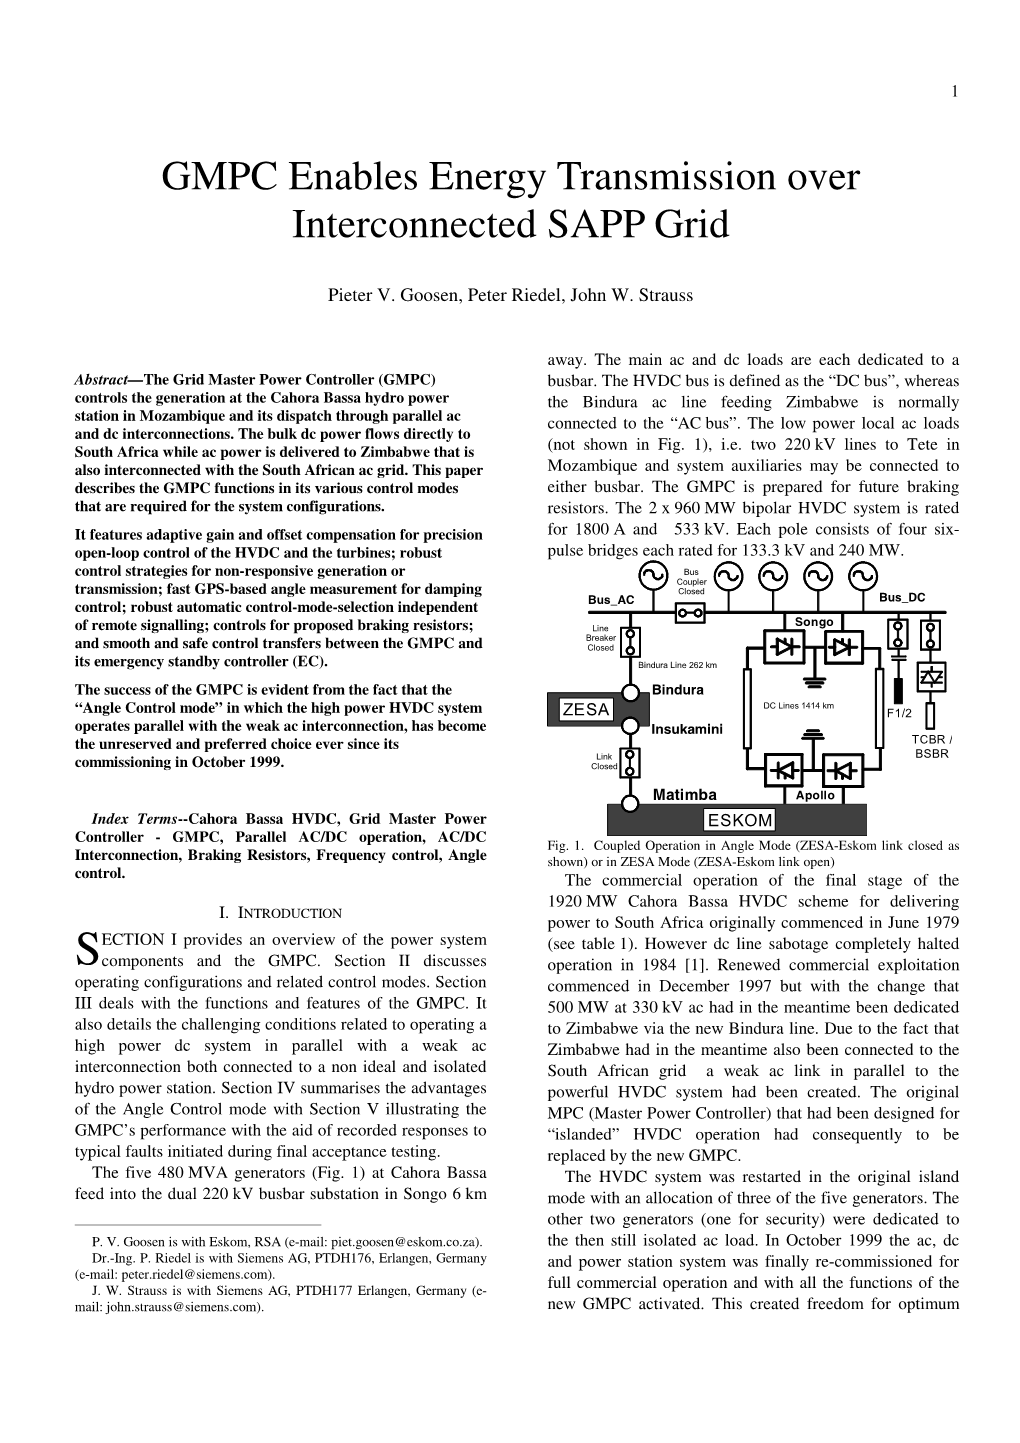 GMPC Enables Energy Transmission Over Interconnected SAPP Grid